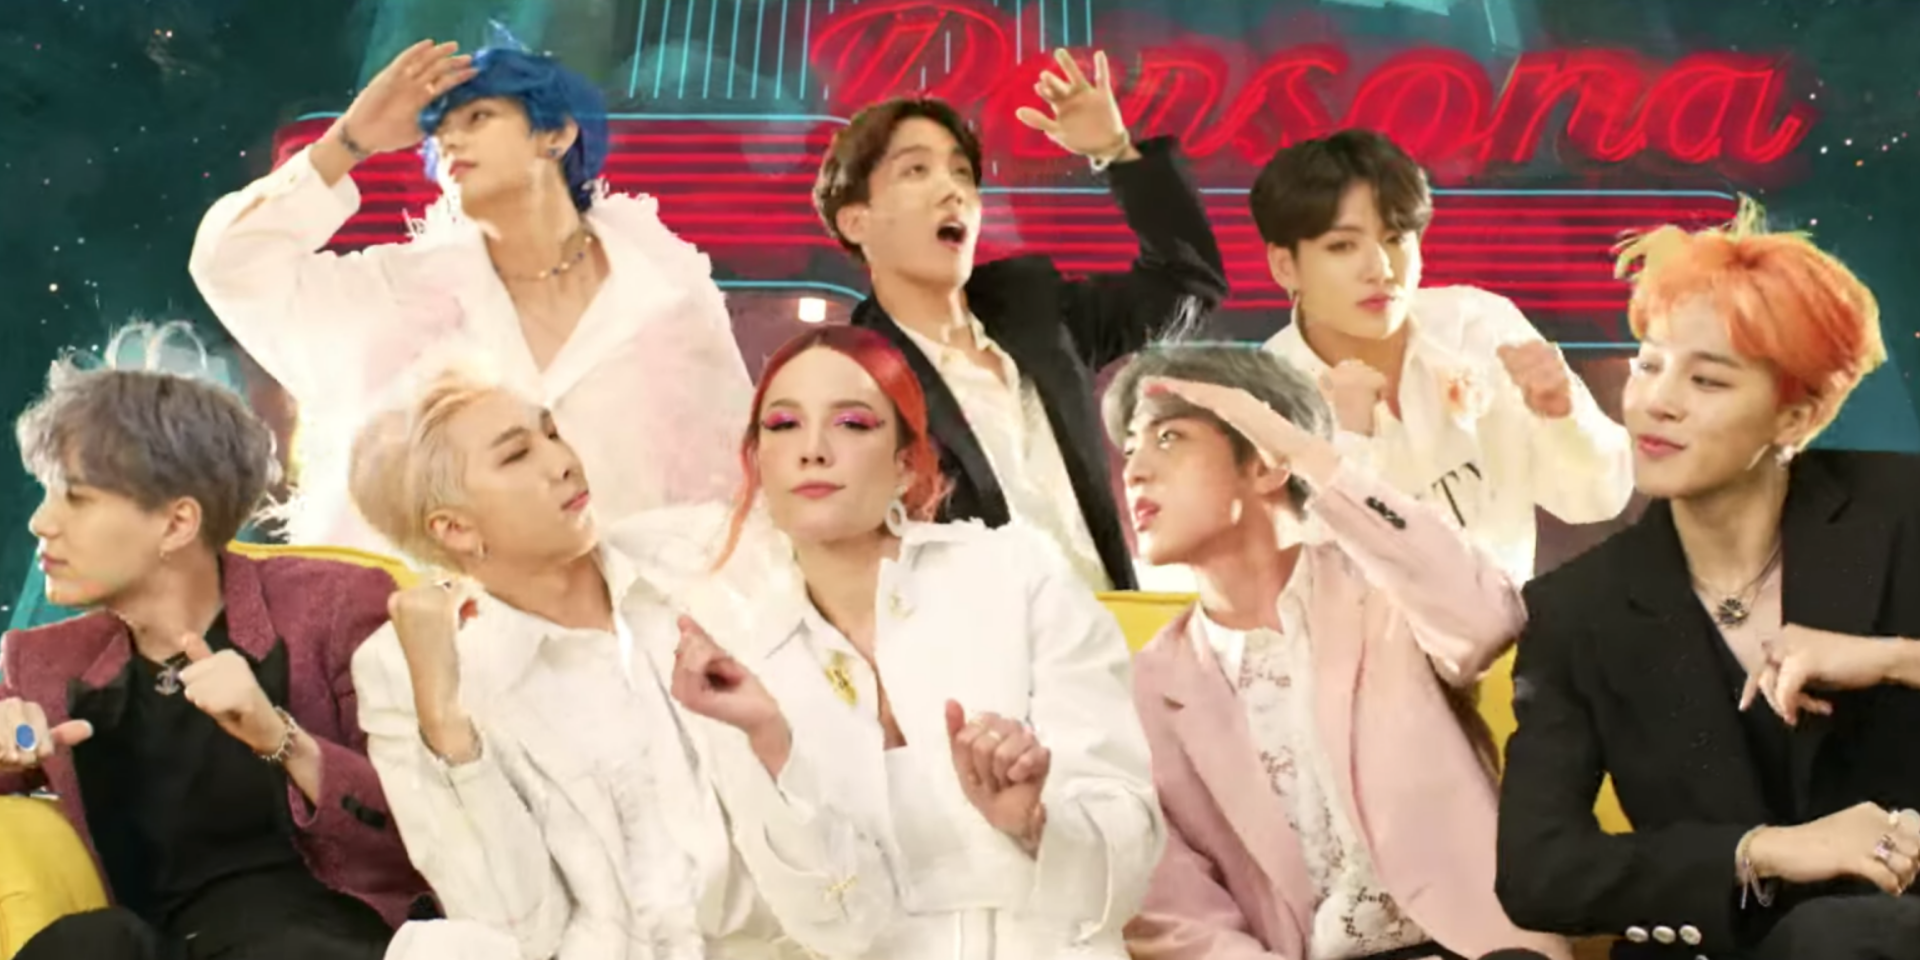 BTS Jimin's Blue Hair in "Boy With Luv" Music Video - wide 10